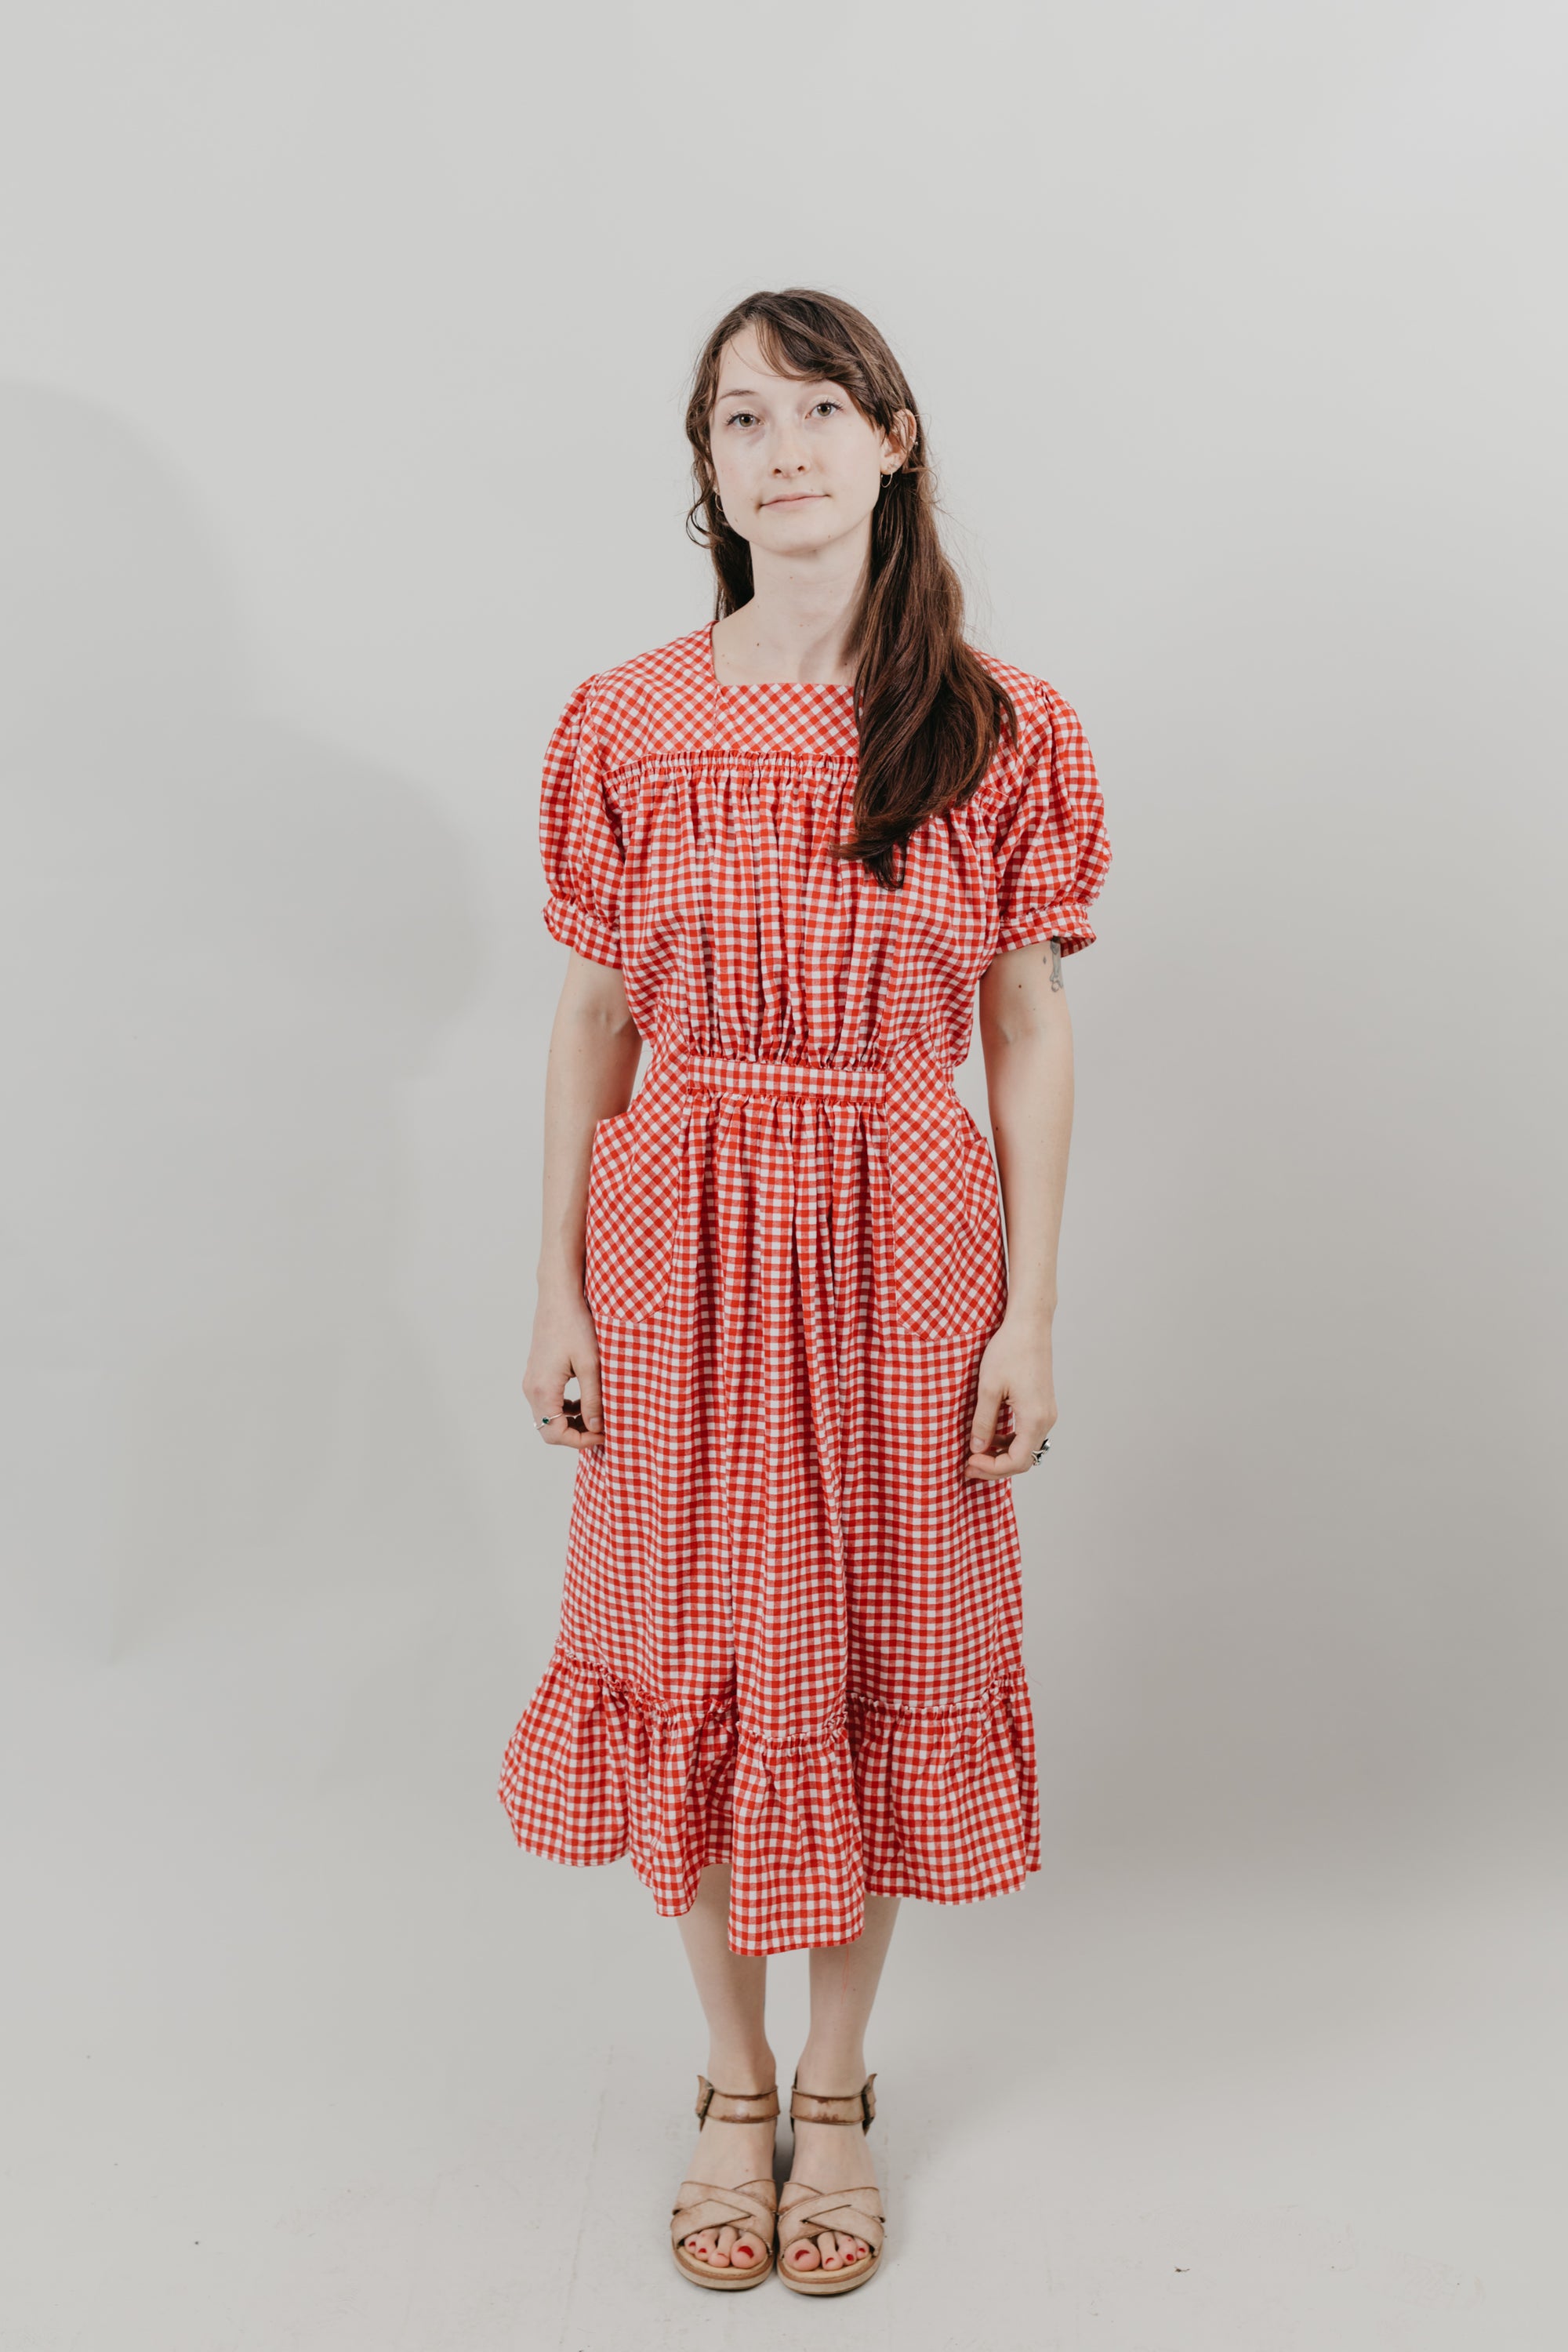 Japanese American woman standing in front of a white background wearing a red and white gingham calf-length dress with puffed sleeves, and a flounce.  Dress is belted at the waist and has pockets cut on the bias.